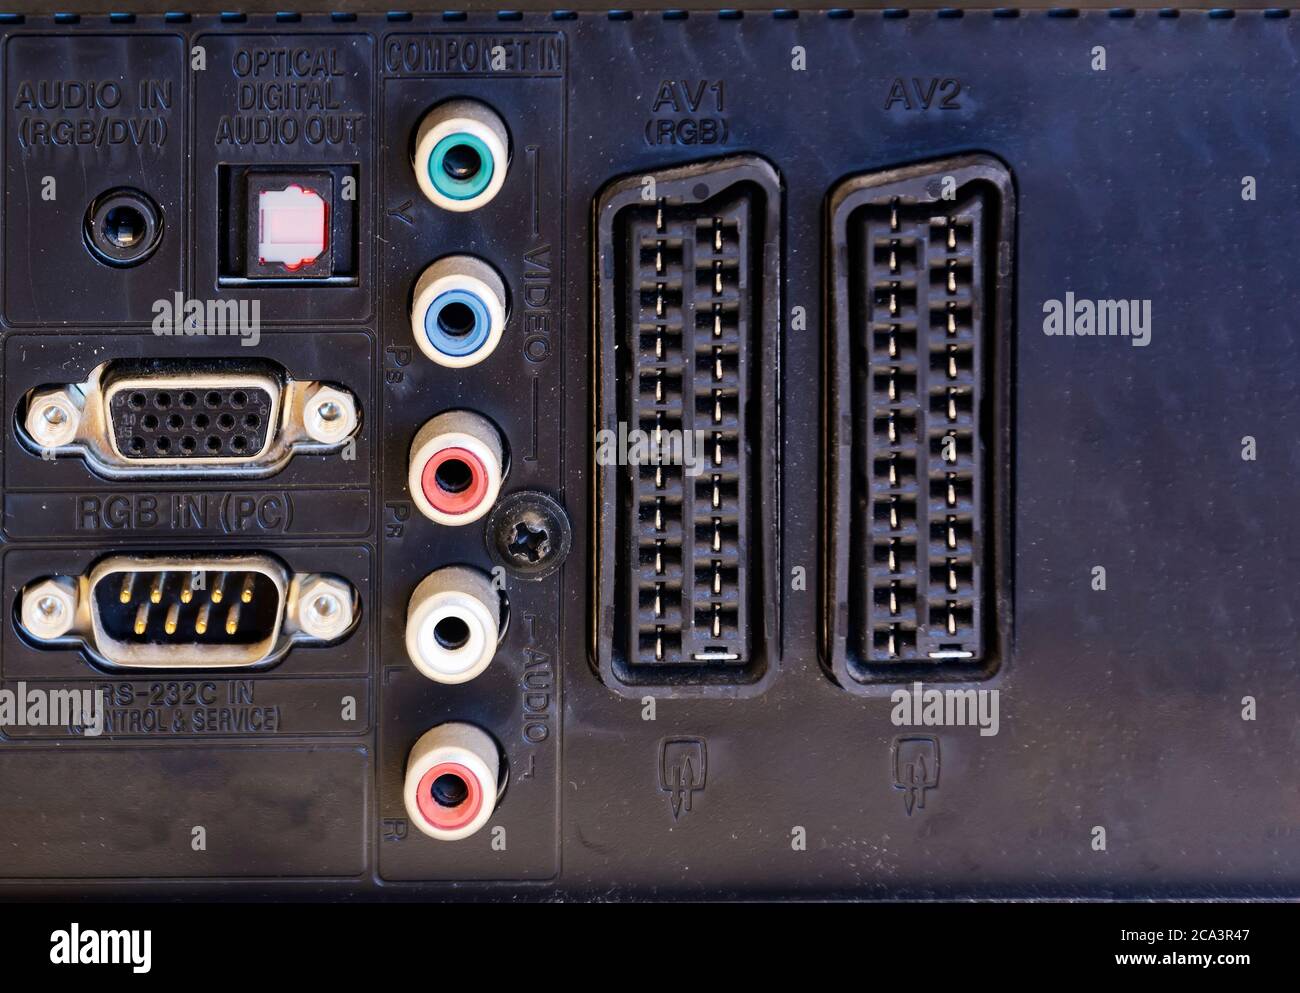 Rear panel of a television with sockets for audio / video, scart connections and for rgb video input for the monitor. Technology and connections betwe Stock Photo